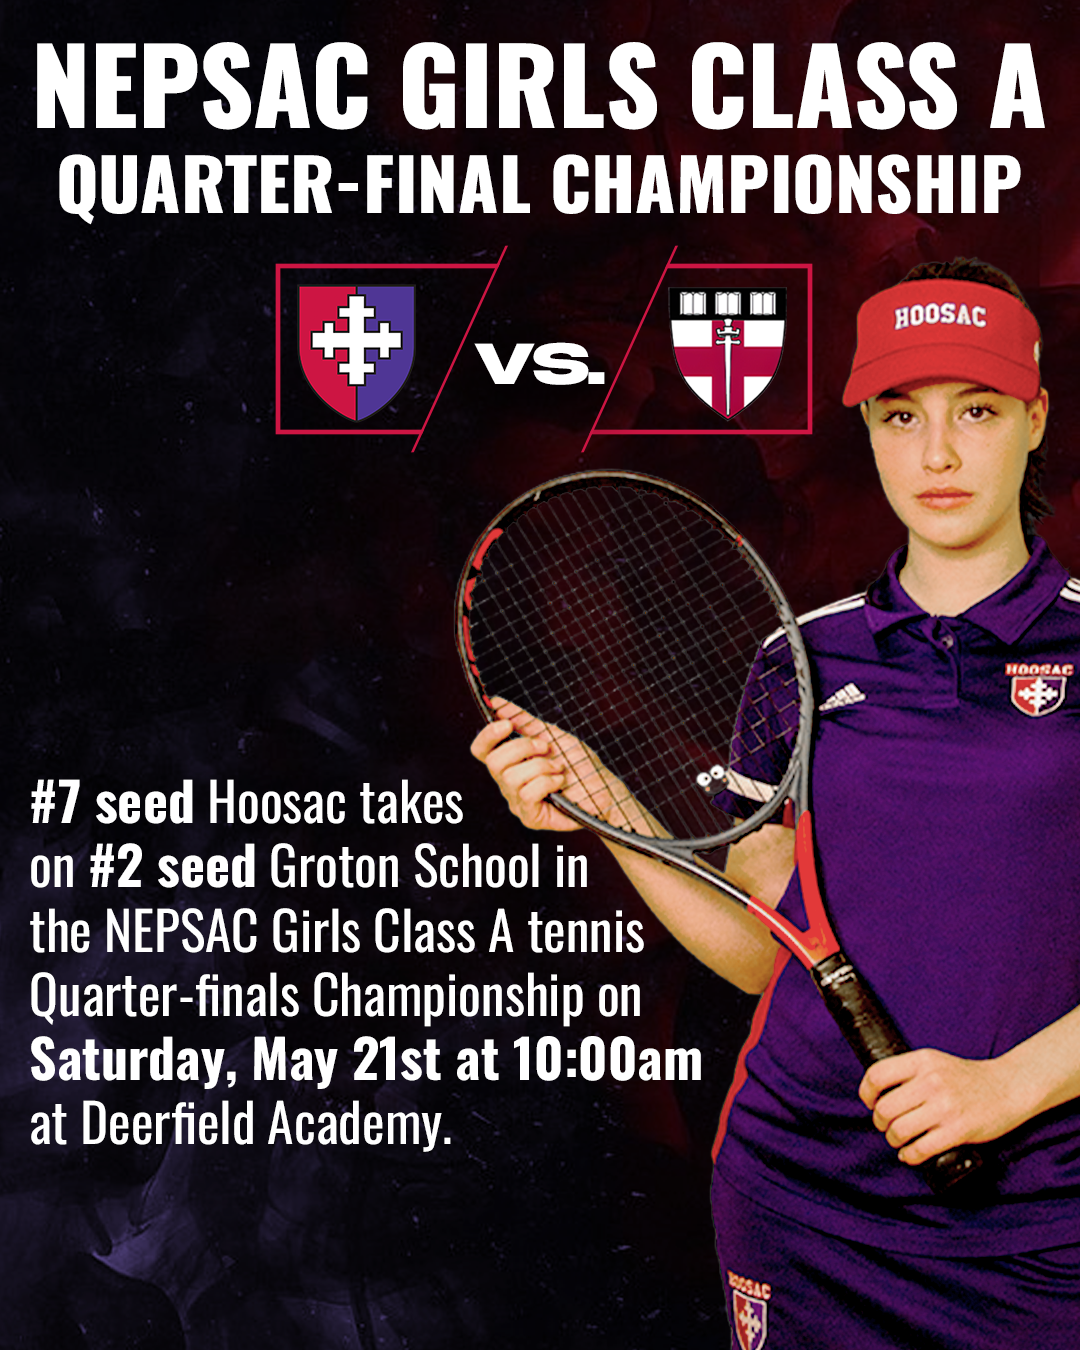 Boys & Girls Tennis Each to Compete for NEPSAC Titles